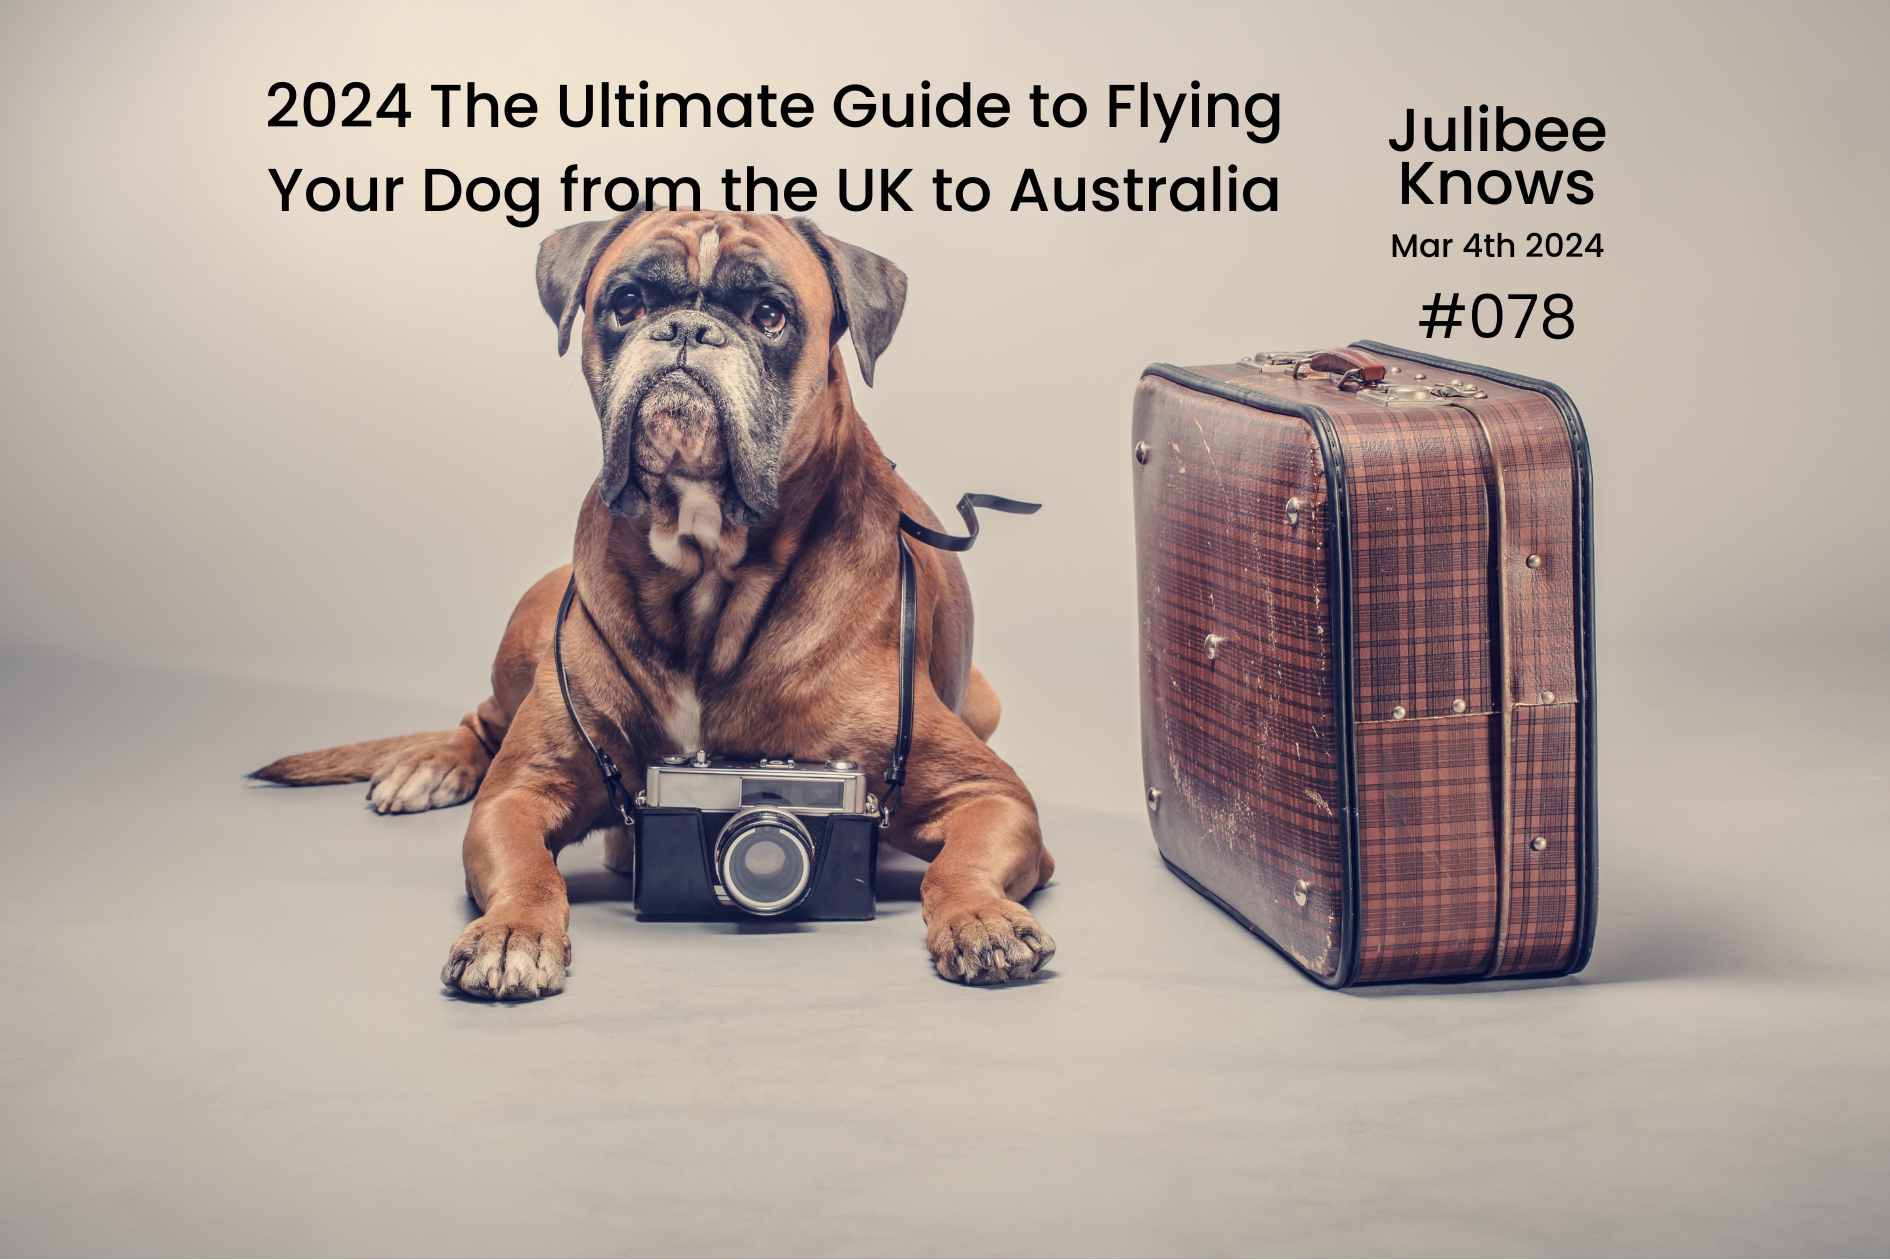 2024 The Ultimate Guide to Flying Your Dog from the UK to Australia